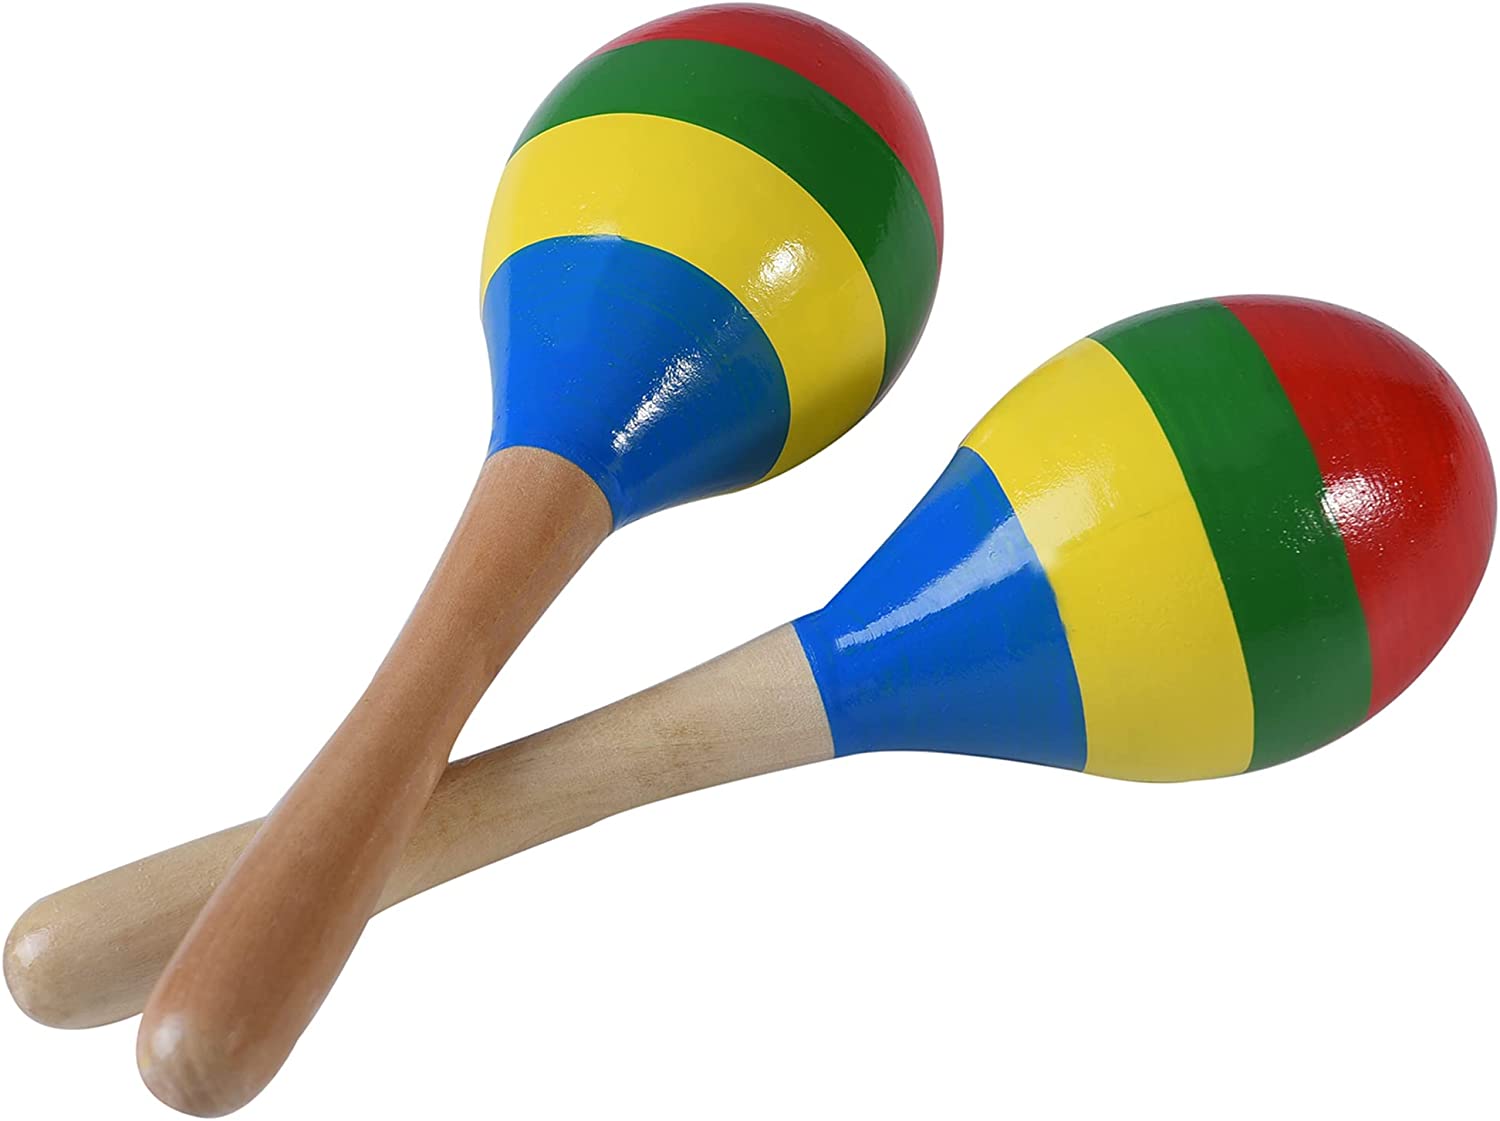 Maracas, Large Size 10 Inch, Rumba Shaker Rattle Hand Percussion Musical  Instrument for Adults Kids, Red, Set of 2